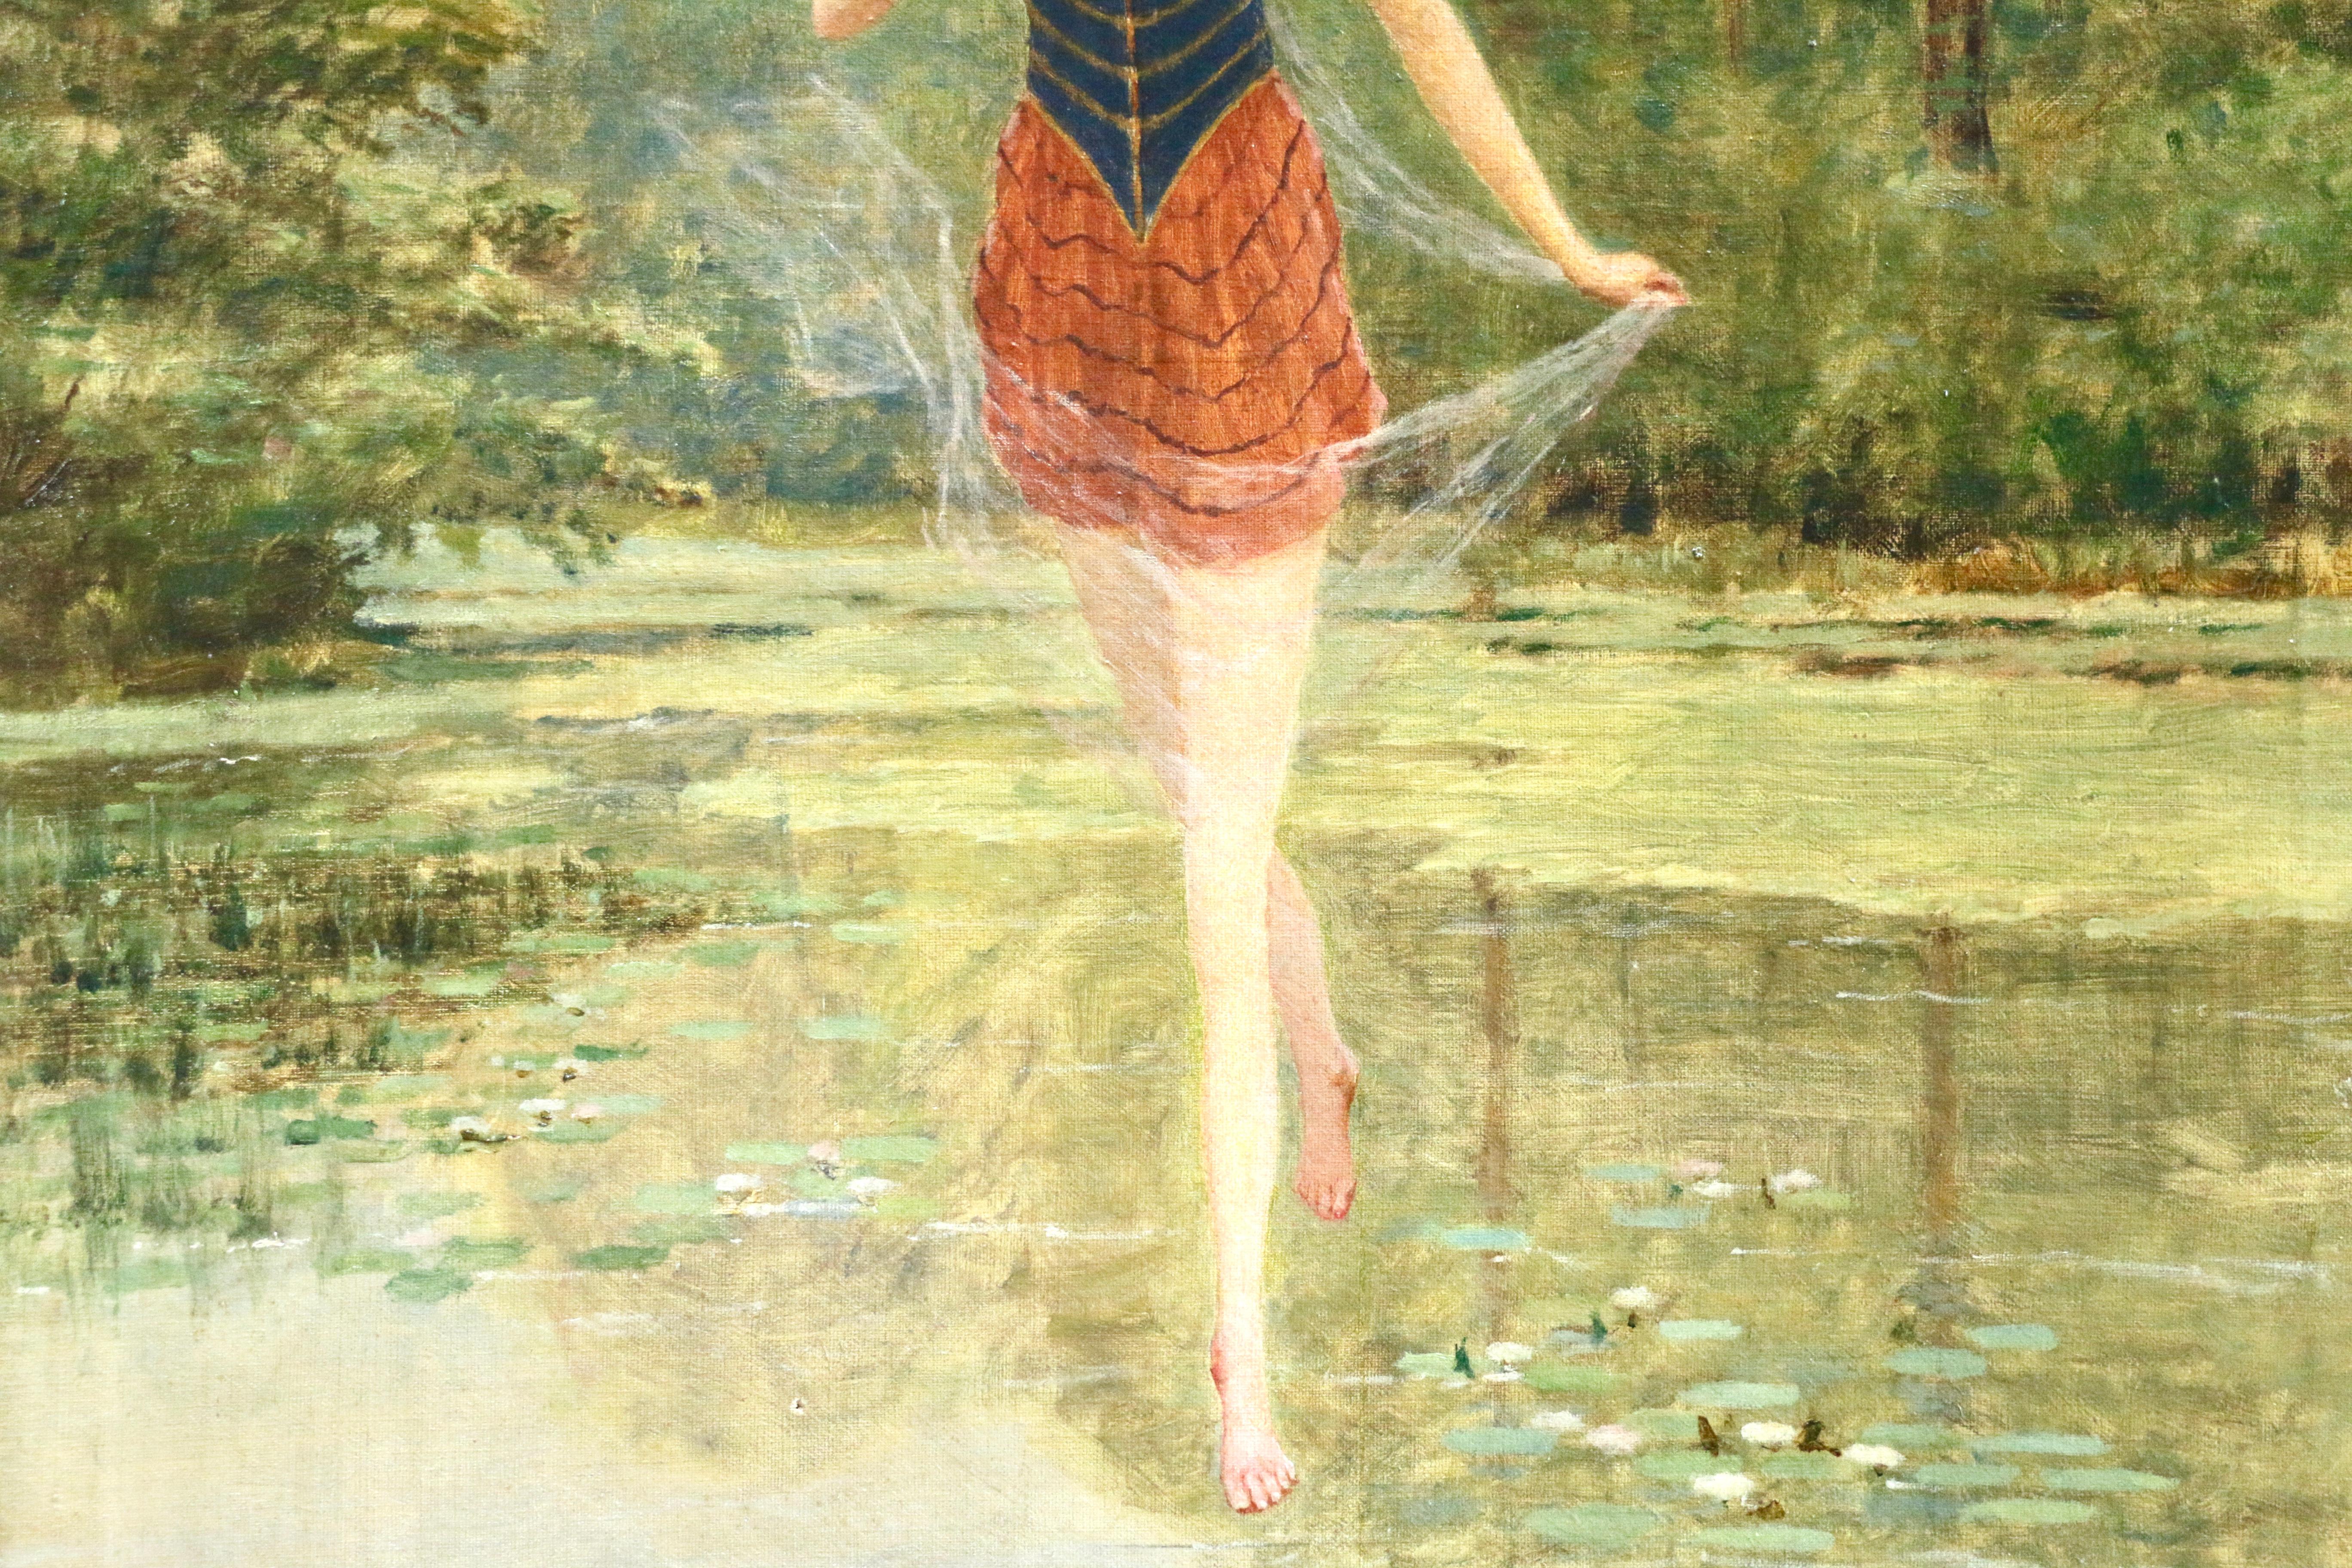 An elegant picture describing a fairy over the river holding a flower. Large oil on canvas by Cesar Pattein. Signed lower right and dated 1920.

César Pattein studied under Jules Breton. He was active from 1882 to 1914, and exhibited at the Salon